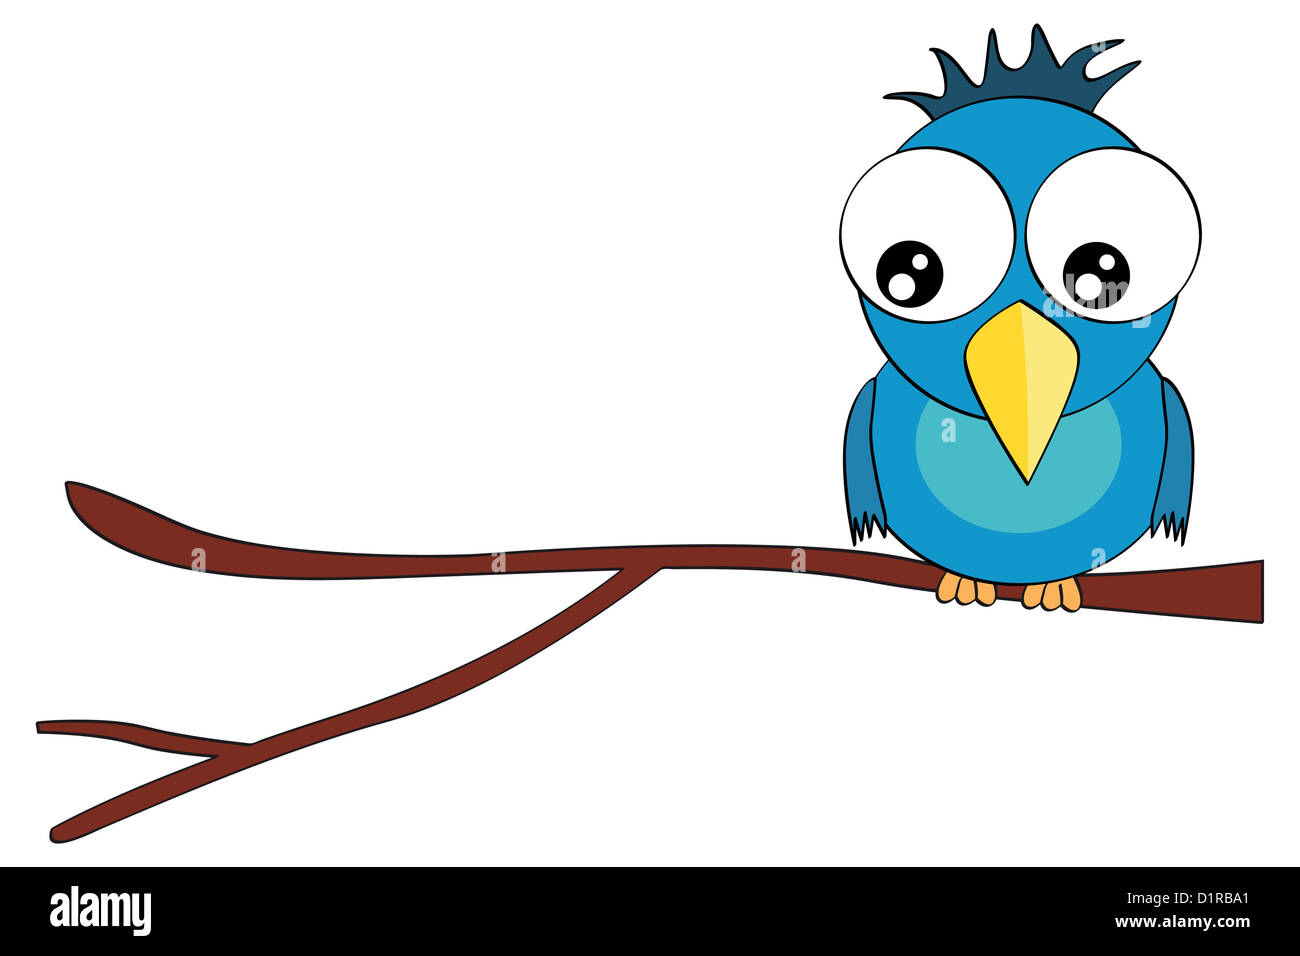 Cartoon smiling bird character on branch illustration isolated on white  background Stock Photo - Alamy